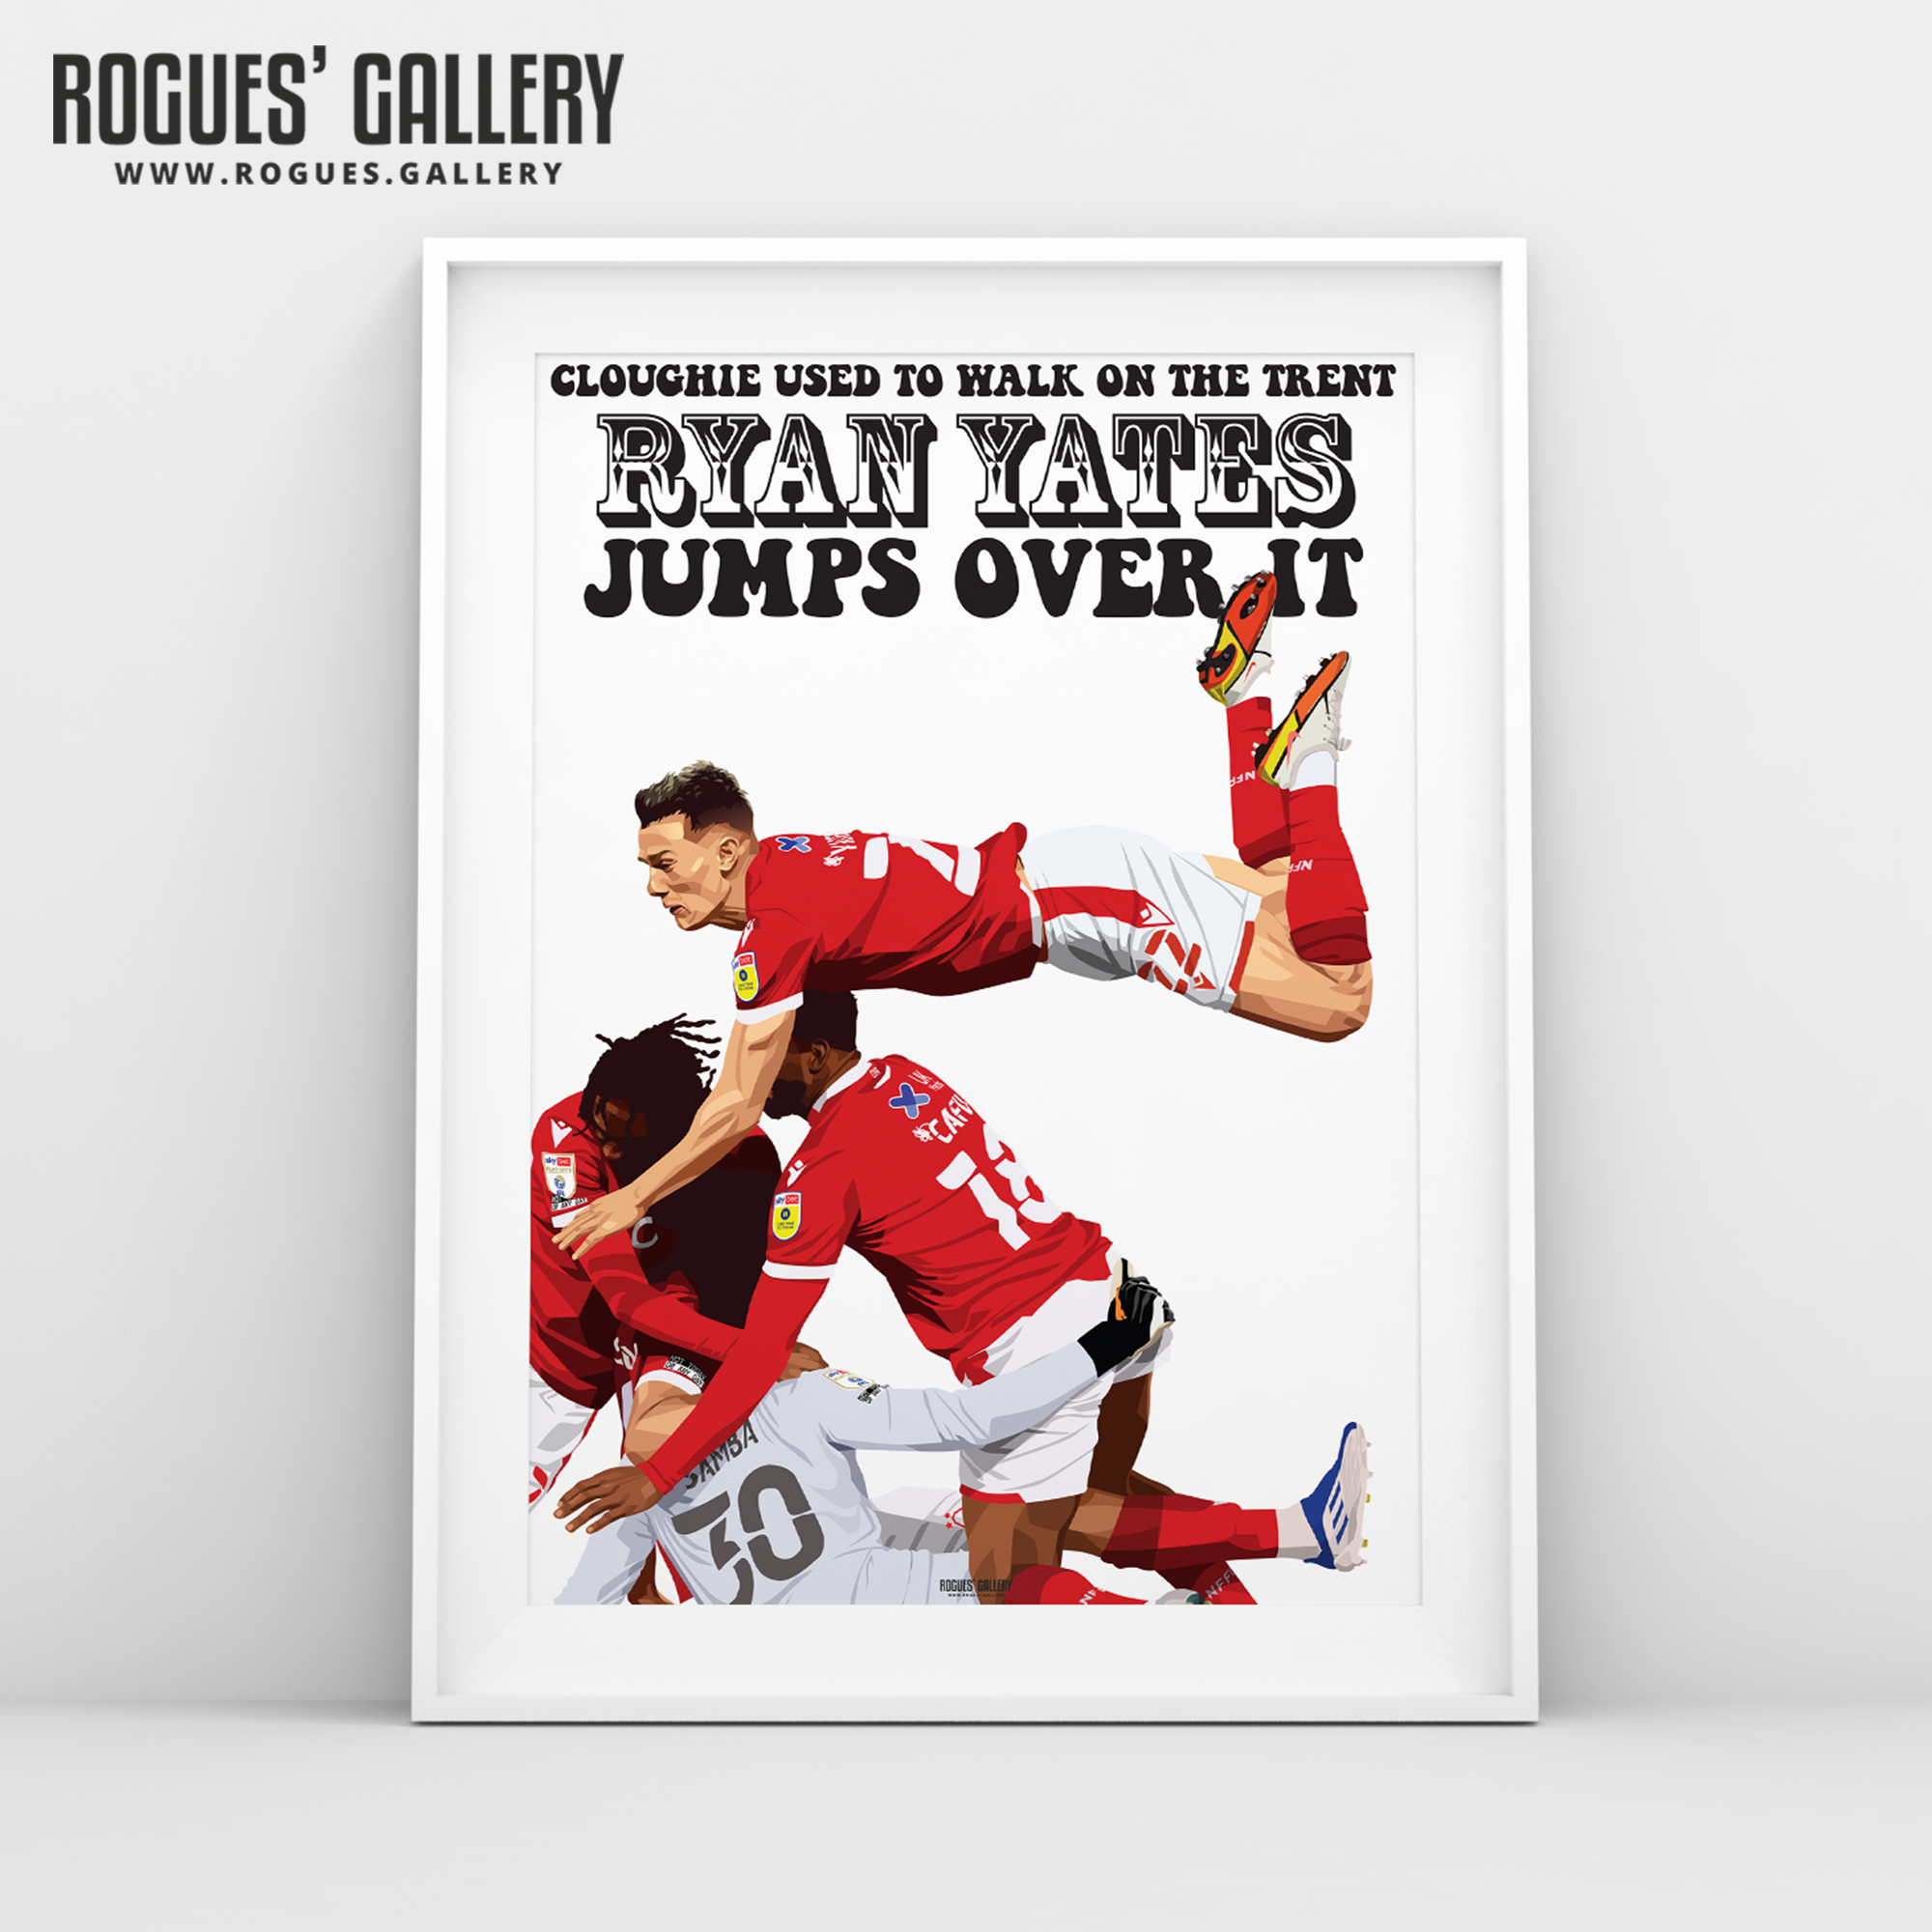 Ryan Yates Jumps Over the Trent A3 print Nottingham Forest midfielder